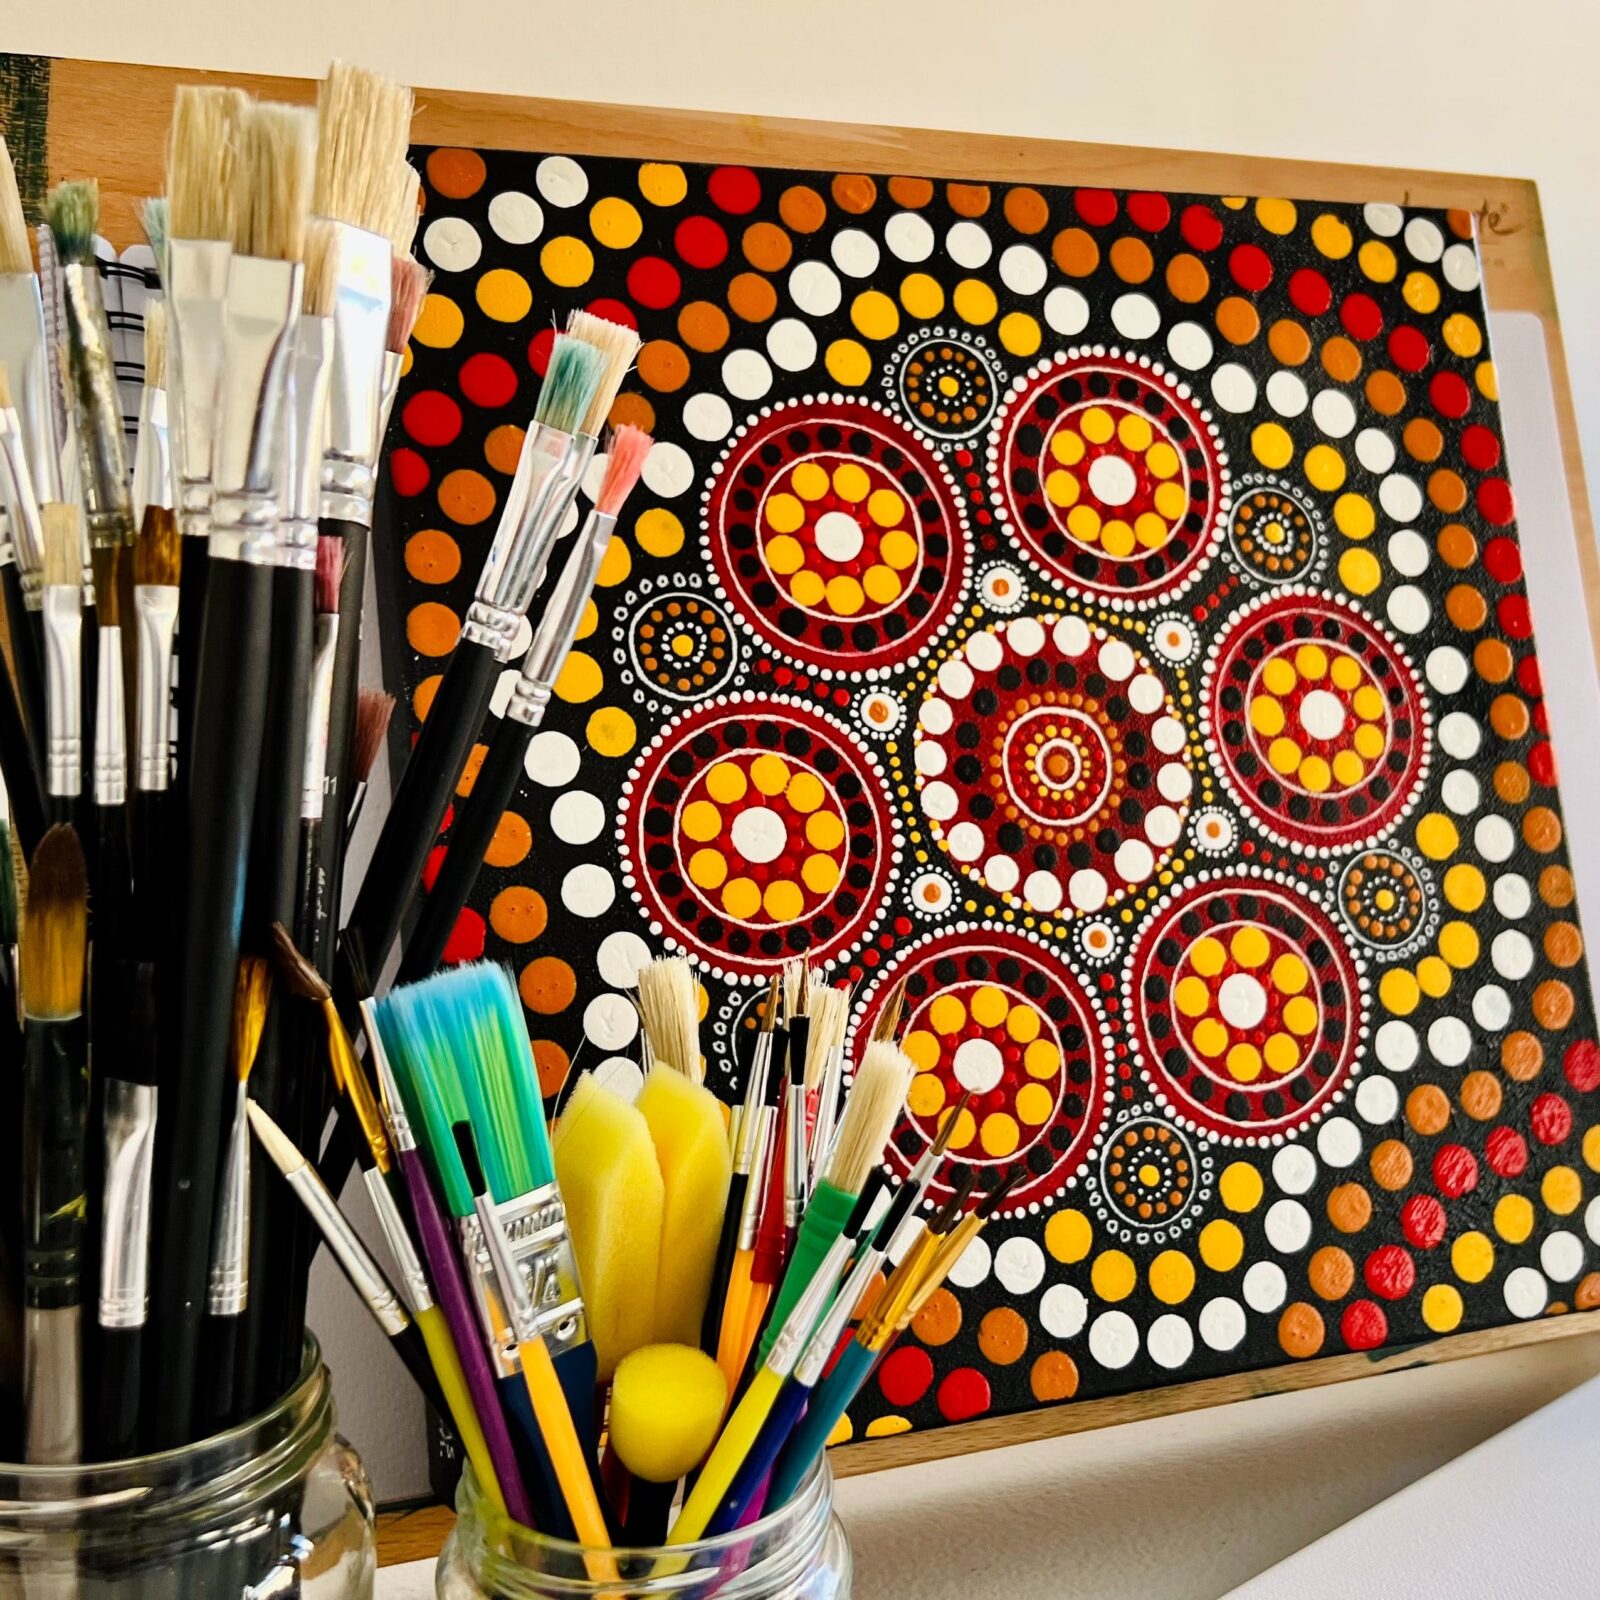 Gamilaraay Artist Vivianne Smith jnr's Artwork with paintbrushes in glass jar